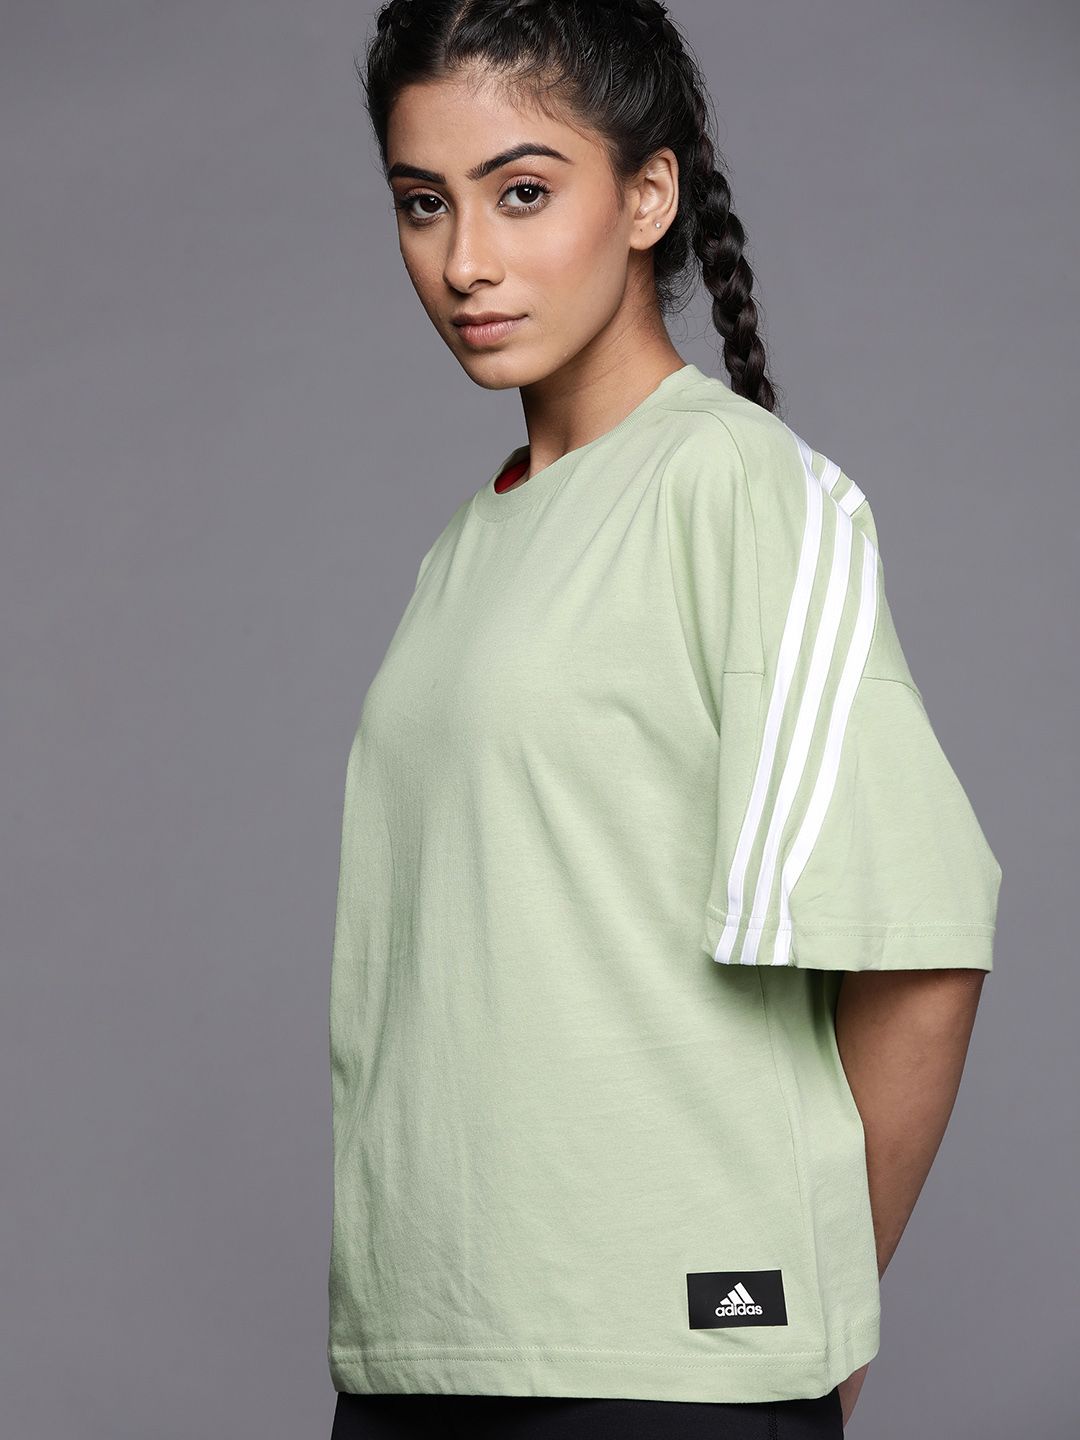 ADIDAS Women Mint Green FI 3S Loose Fit Pure Cotton T-shirt Price in India